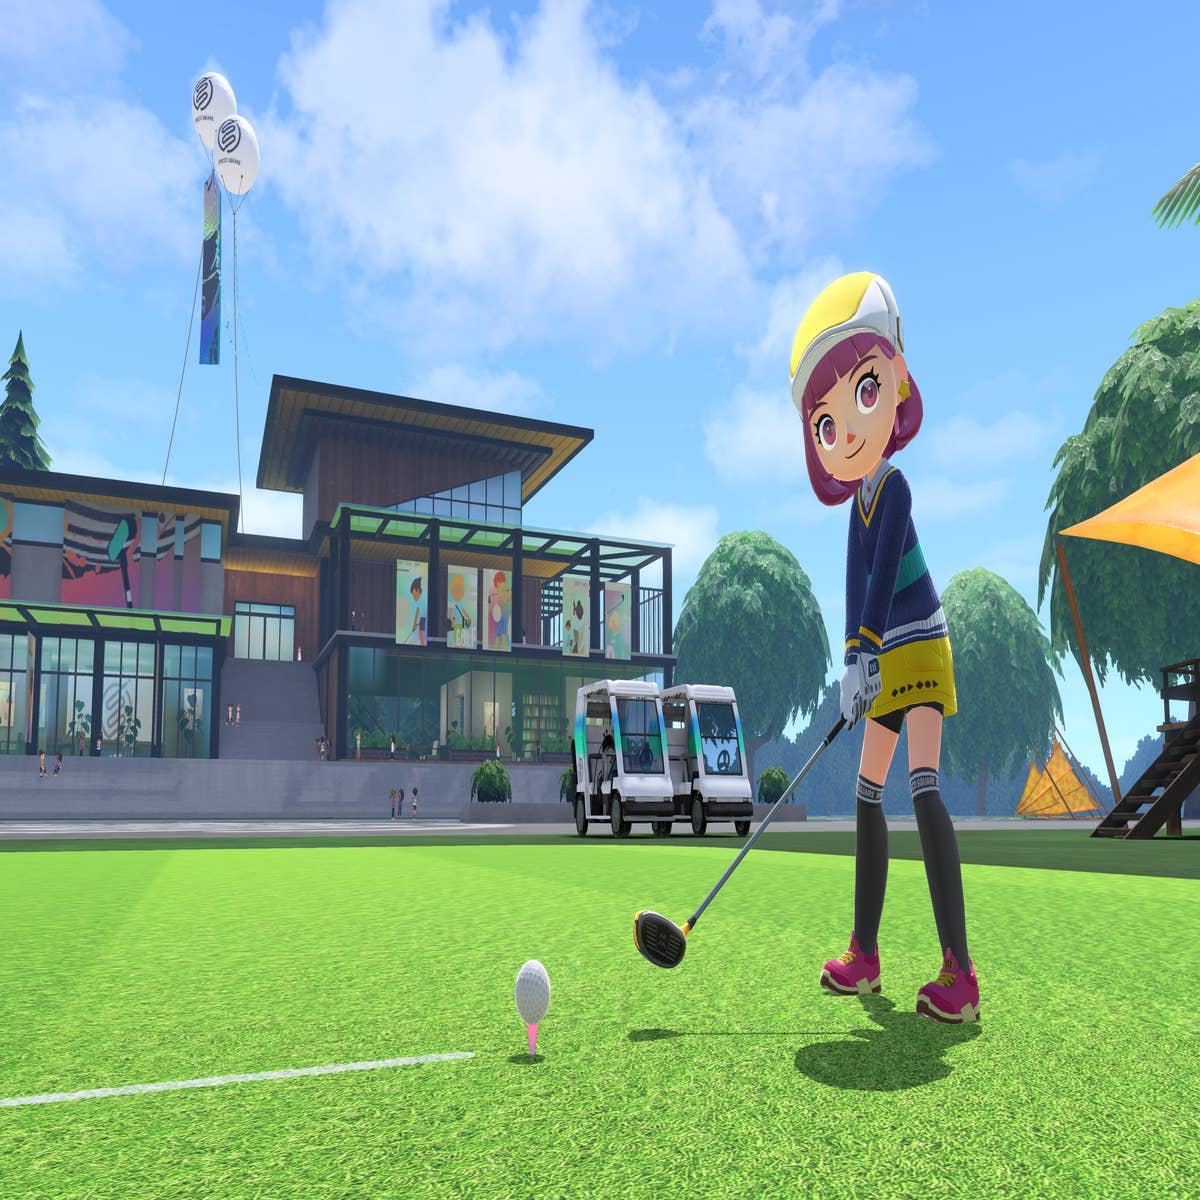 Wii Sports Is Getting A Sequel On The Nintendo Switch